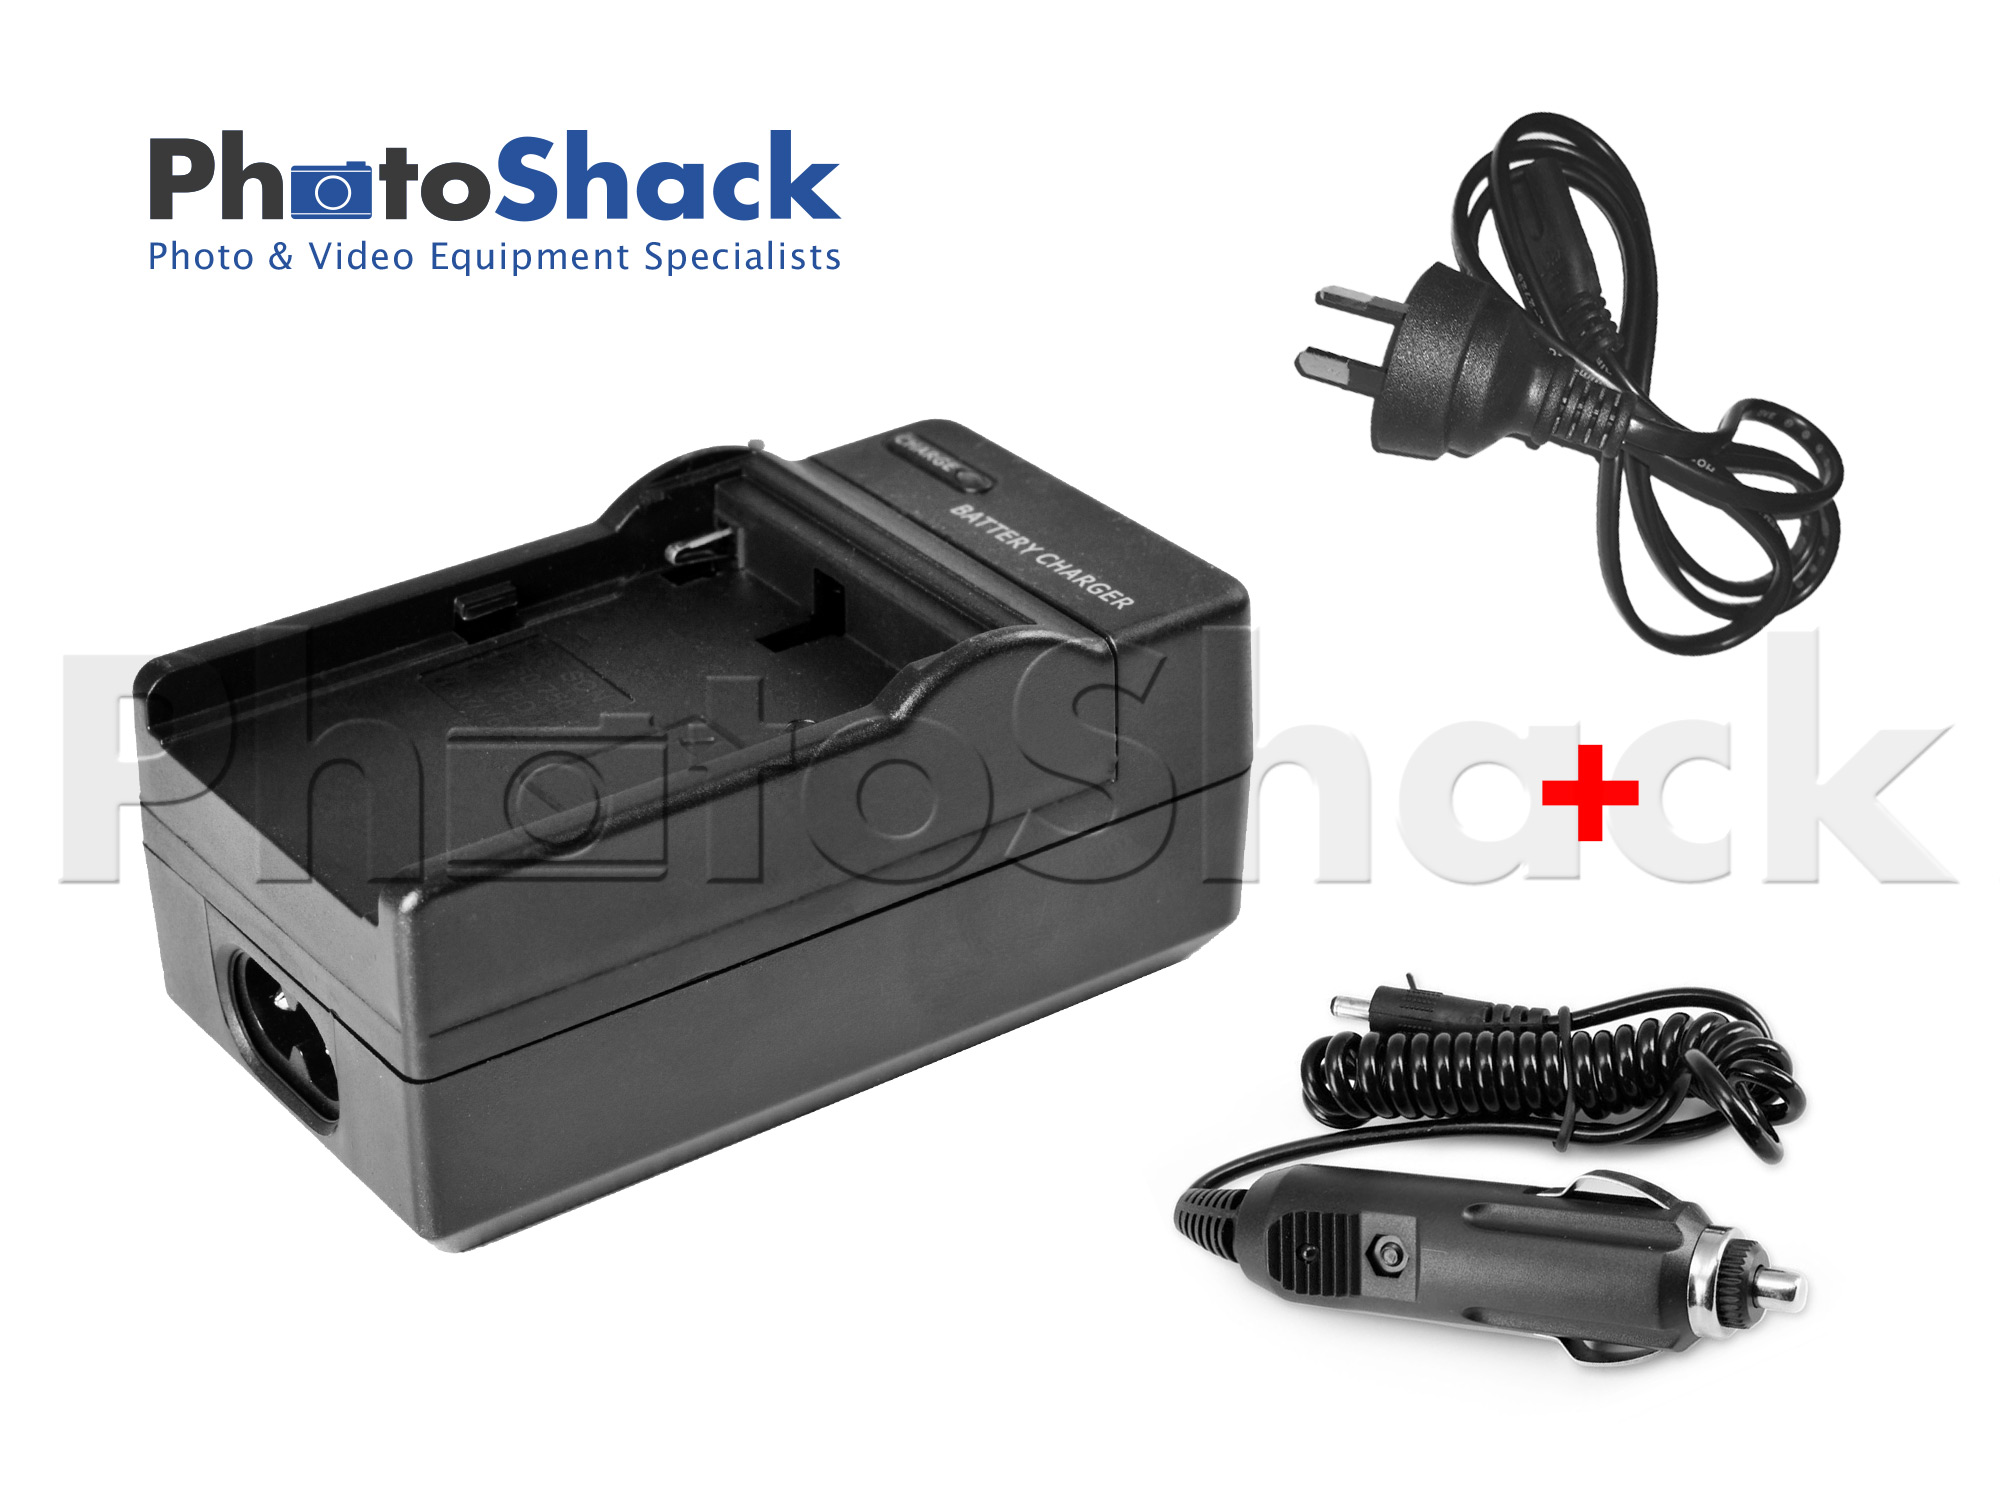 Charger For Compact Canon Camera Batteries 4.2V